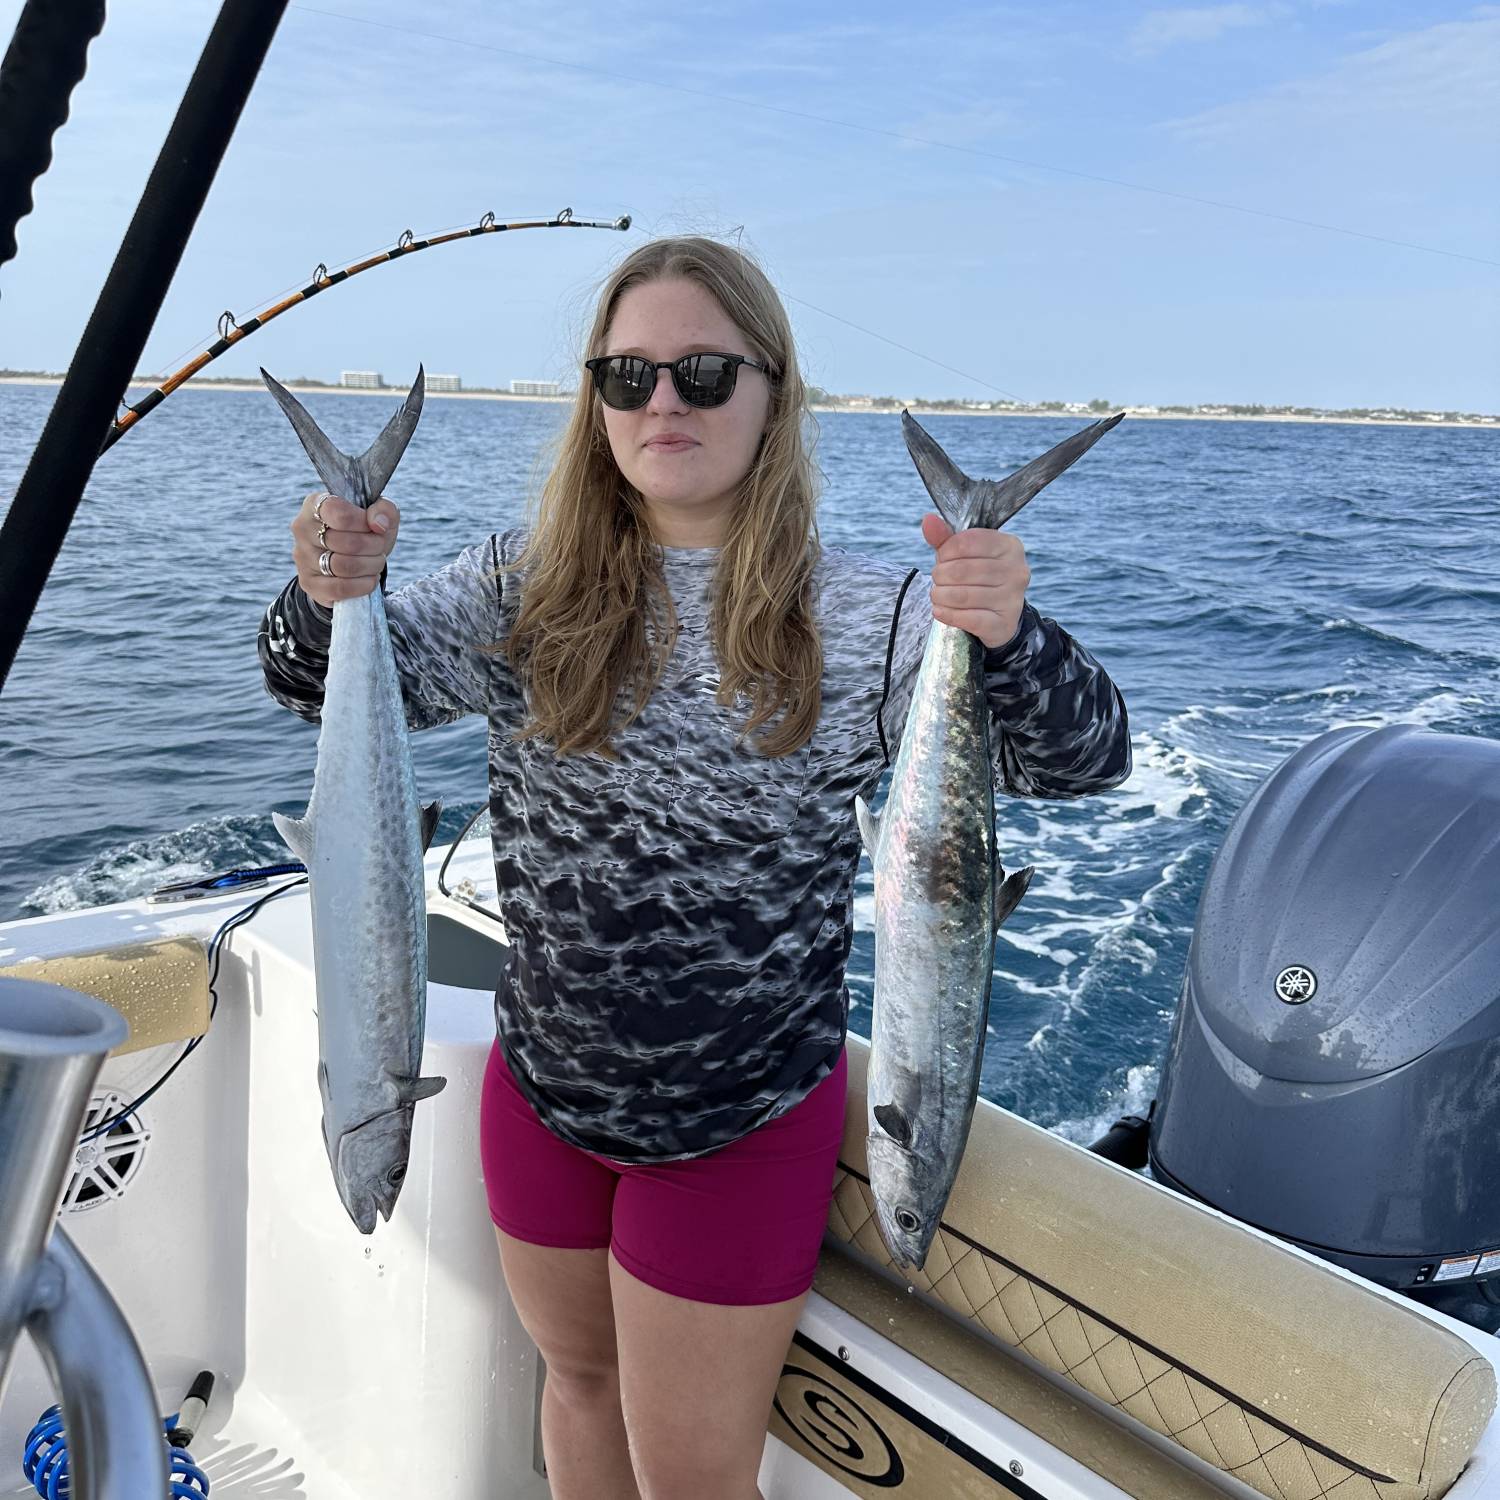 Title: Doubled on kings! - On board their Sportsman Open 232 Center Console - Location: Boynton Beach Florida. Participating in the Photo Contest #SportsmanJanuary2024